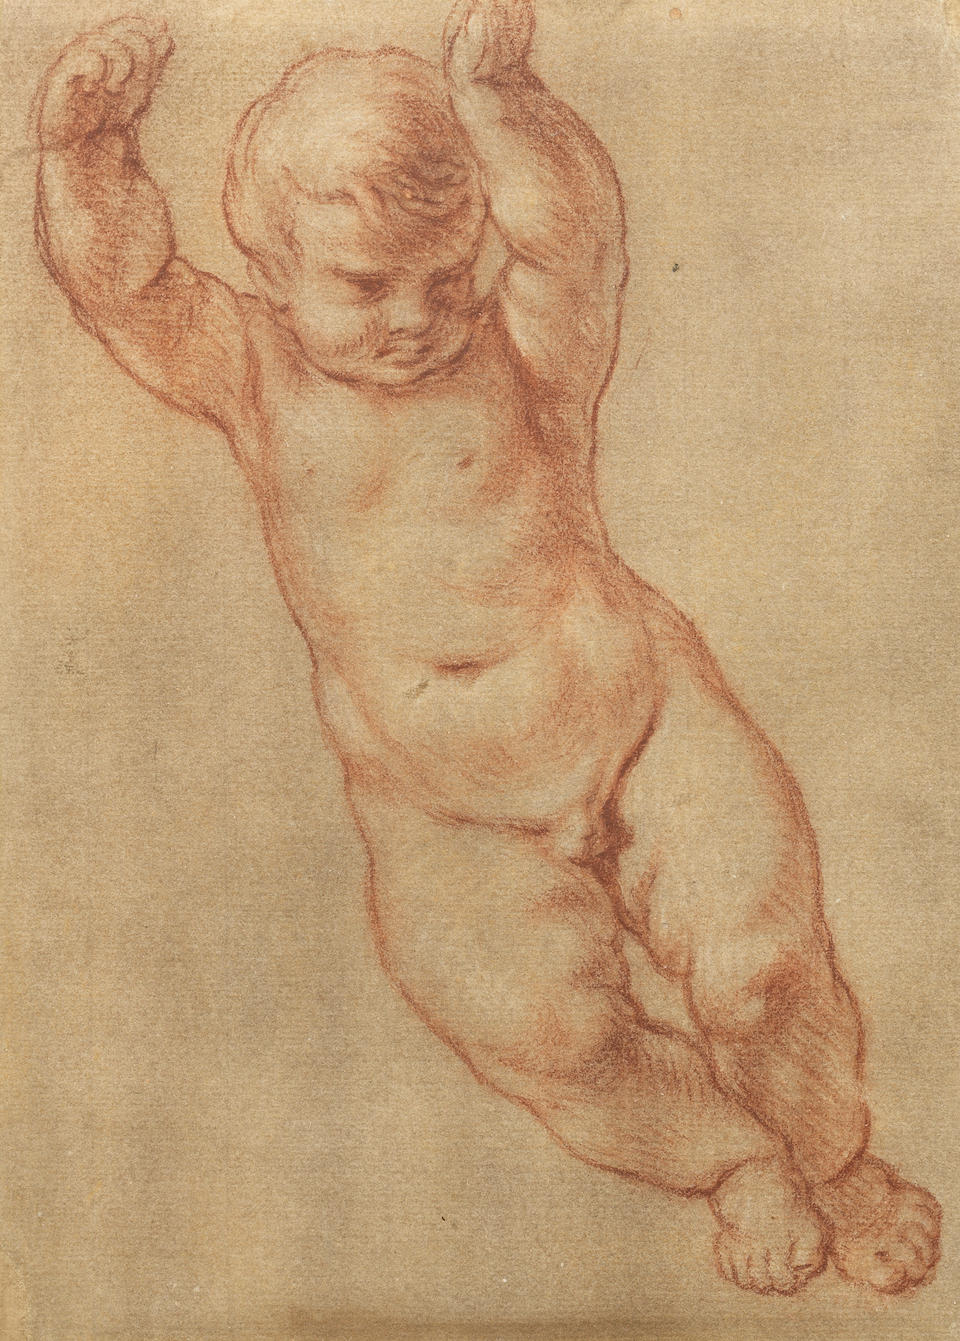 Italian School, 18th century A putto in flight (together with four other drawings by various hands (5))